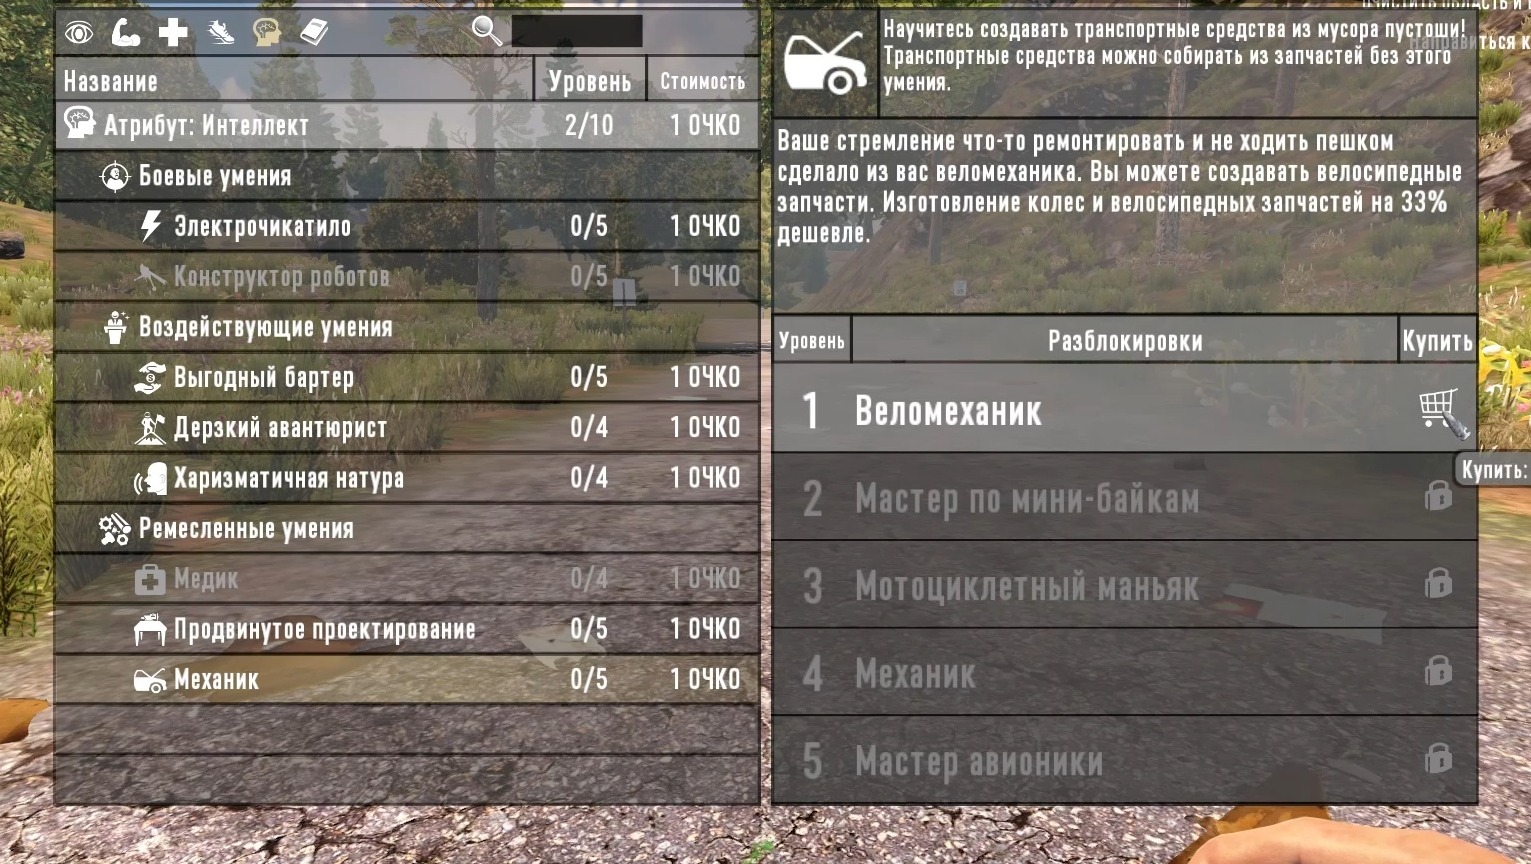 Could not fully initialize steam 7 days to die что делать фото 68